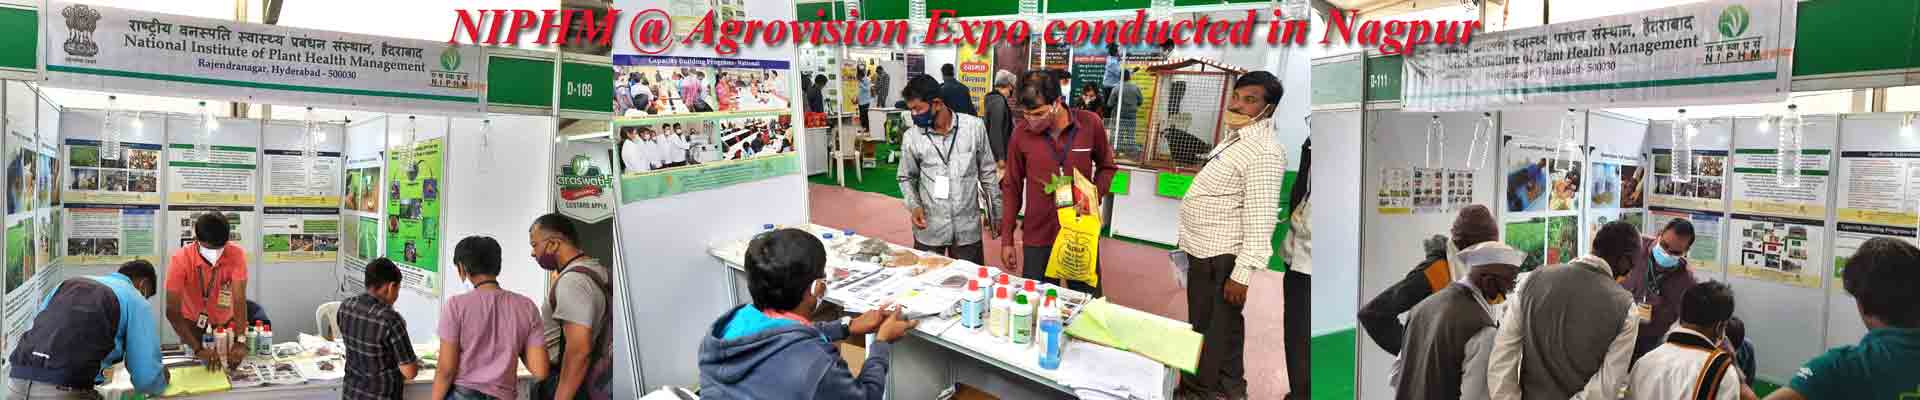 NIPHM exhibited its technologies @ the Agrovision Expo conducted in Nagpur from 24-12-2021 to 27-12-2021